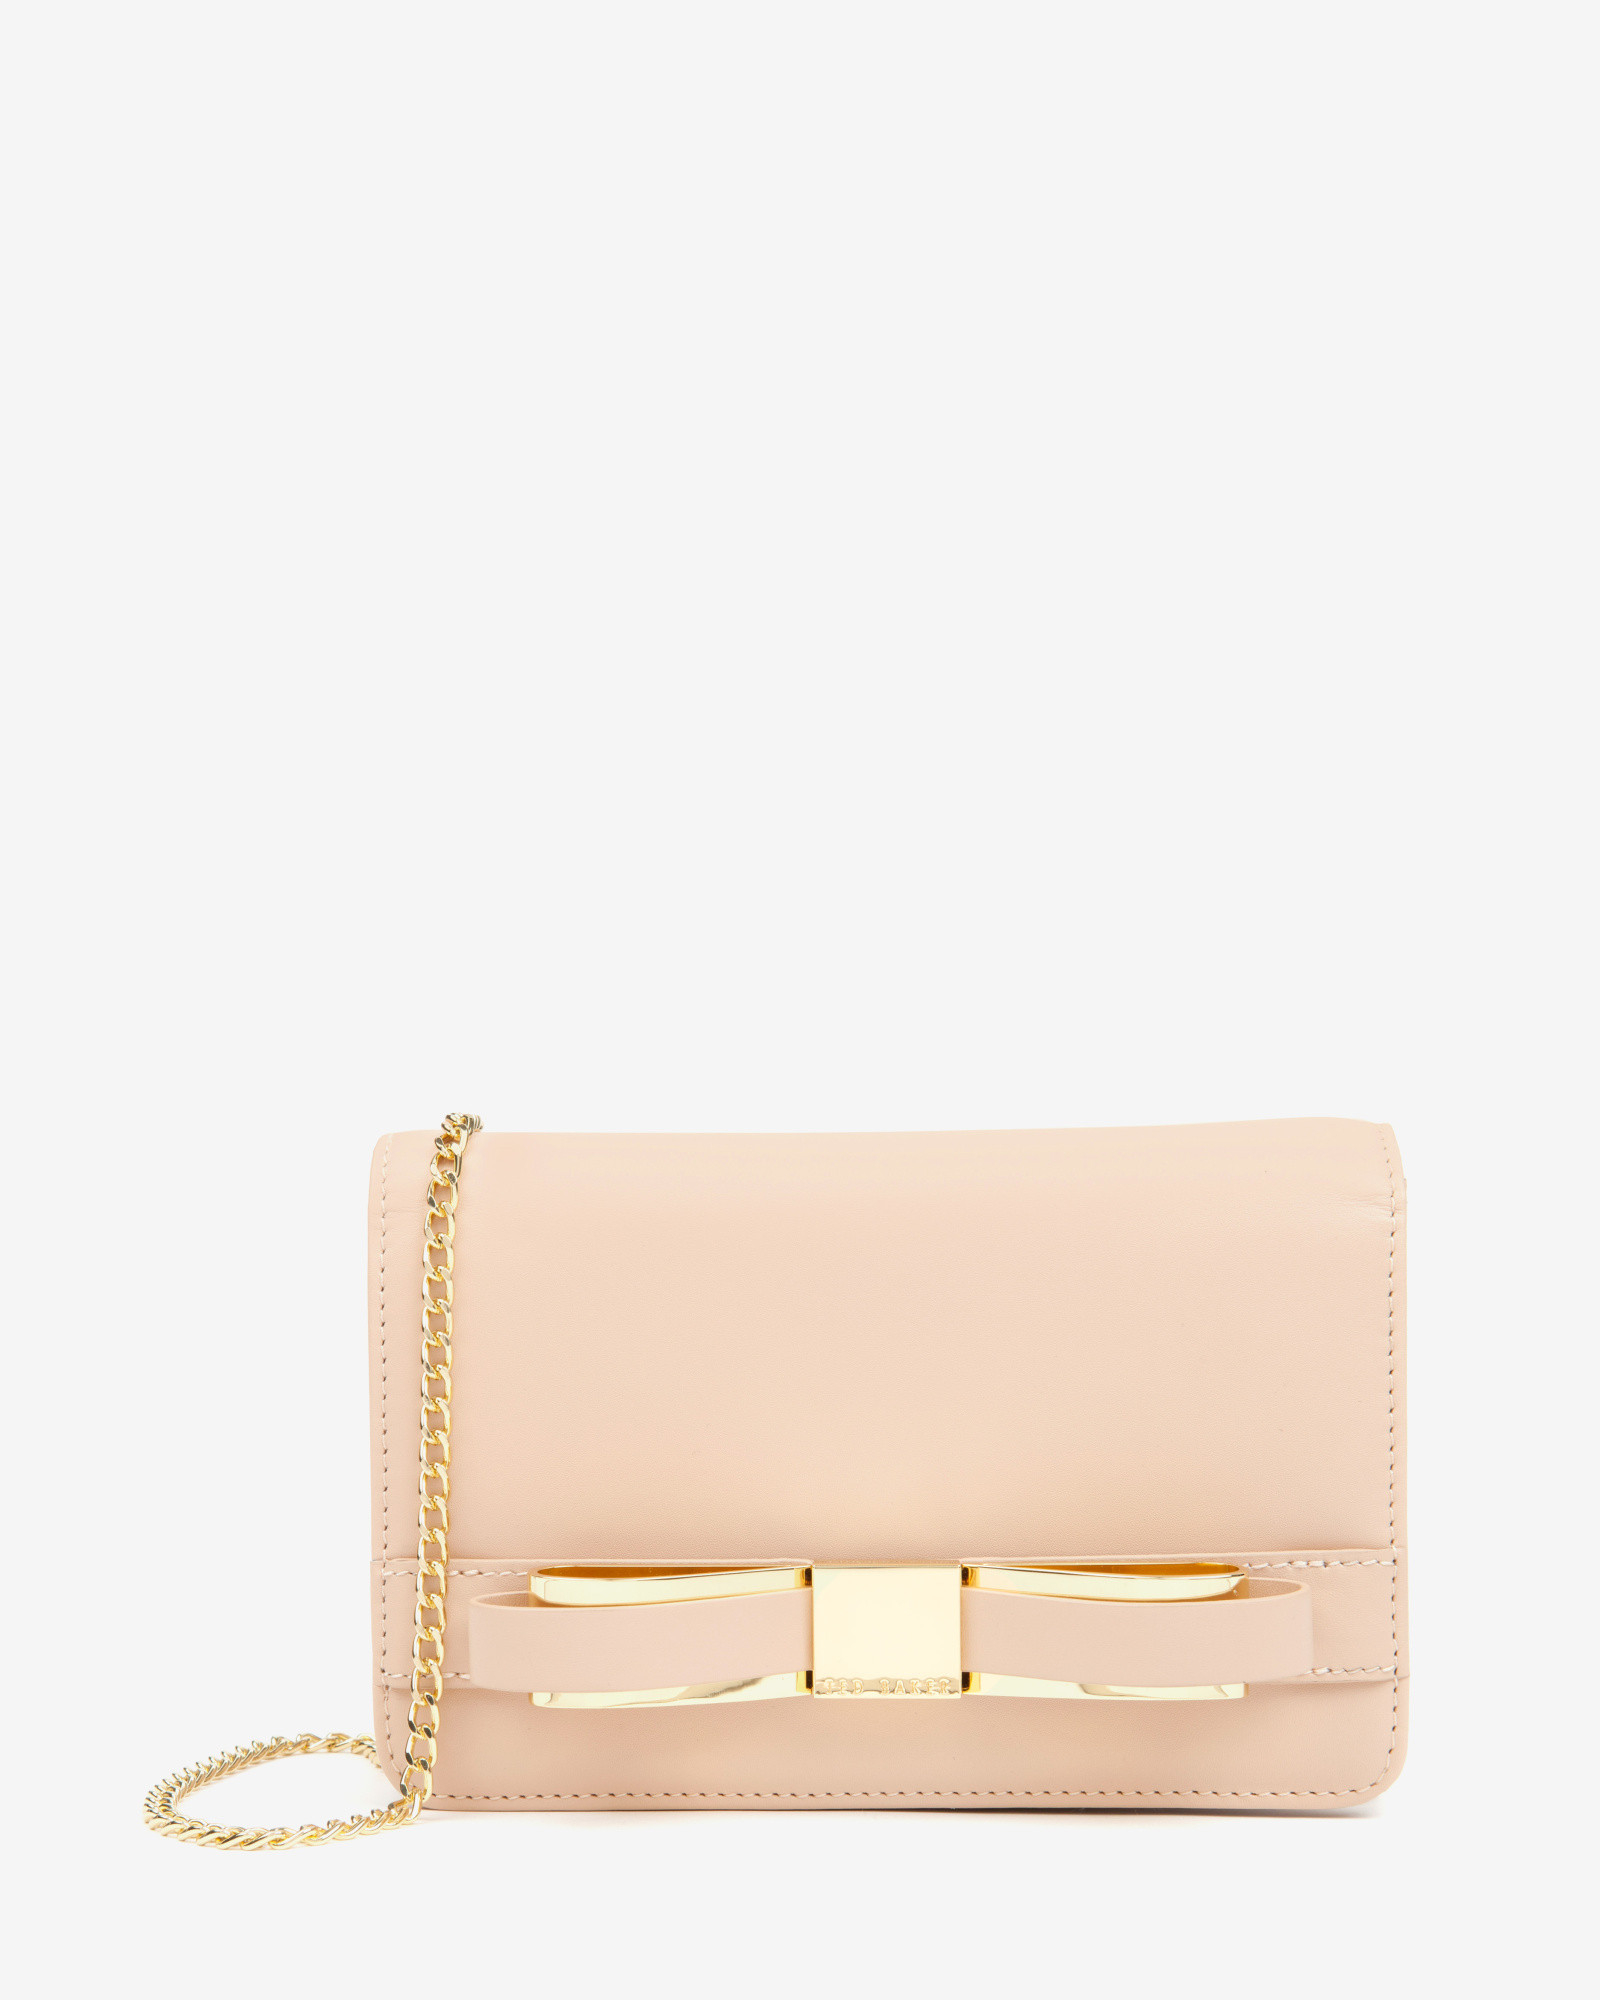 Lyst - Ted Baker Bow Clutch Bag in Natural